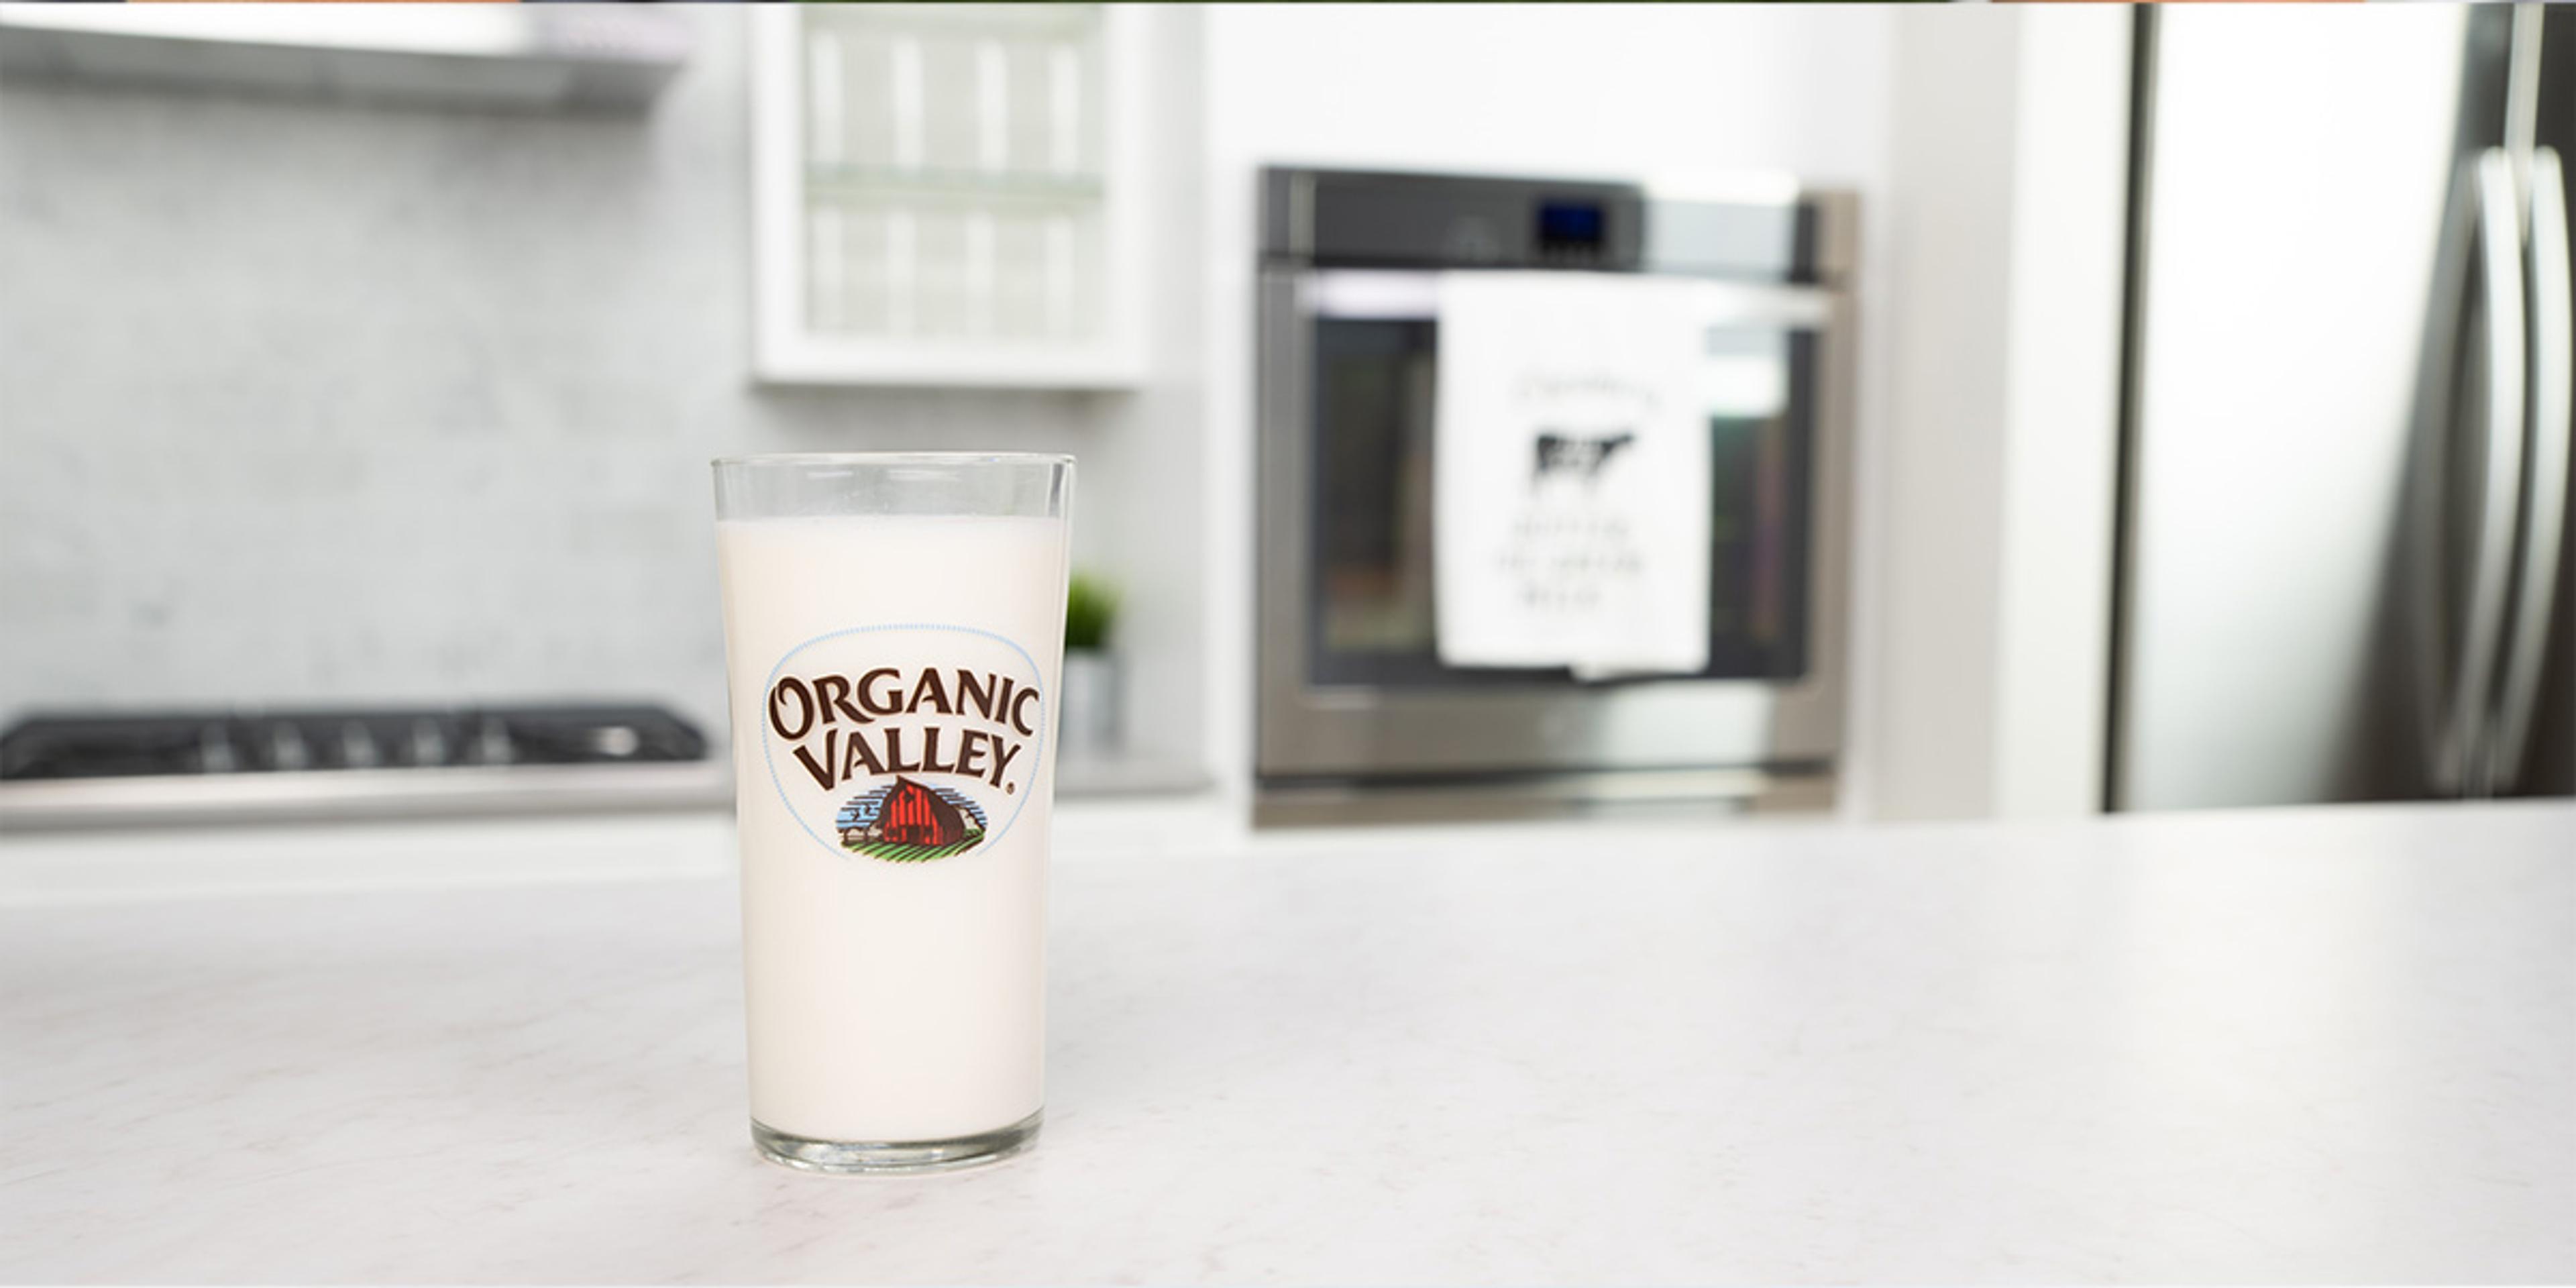 Milk in an Organic Valley glass sits on a counter.